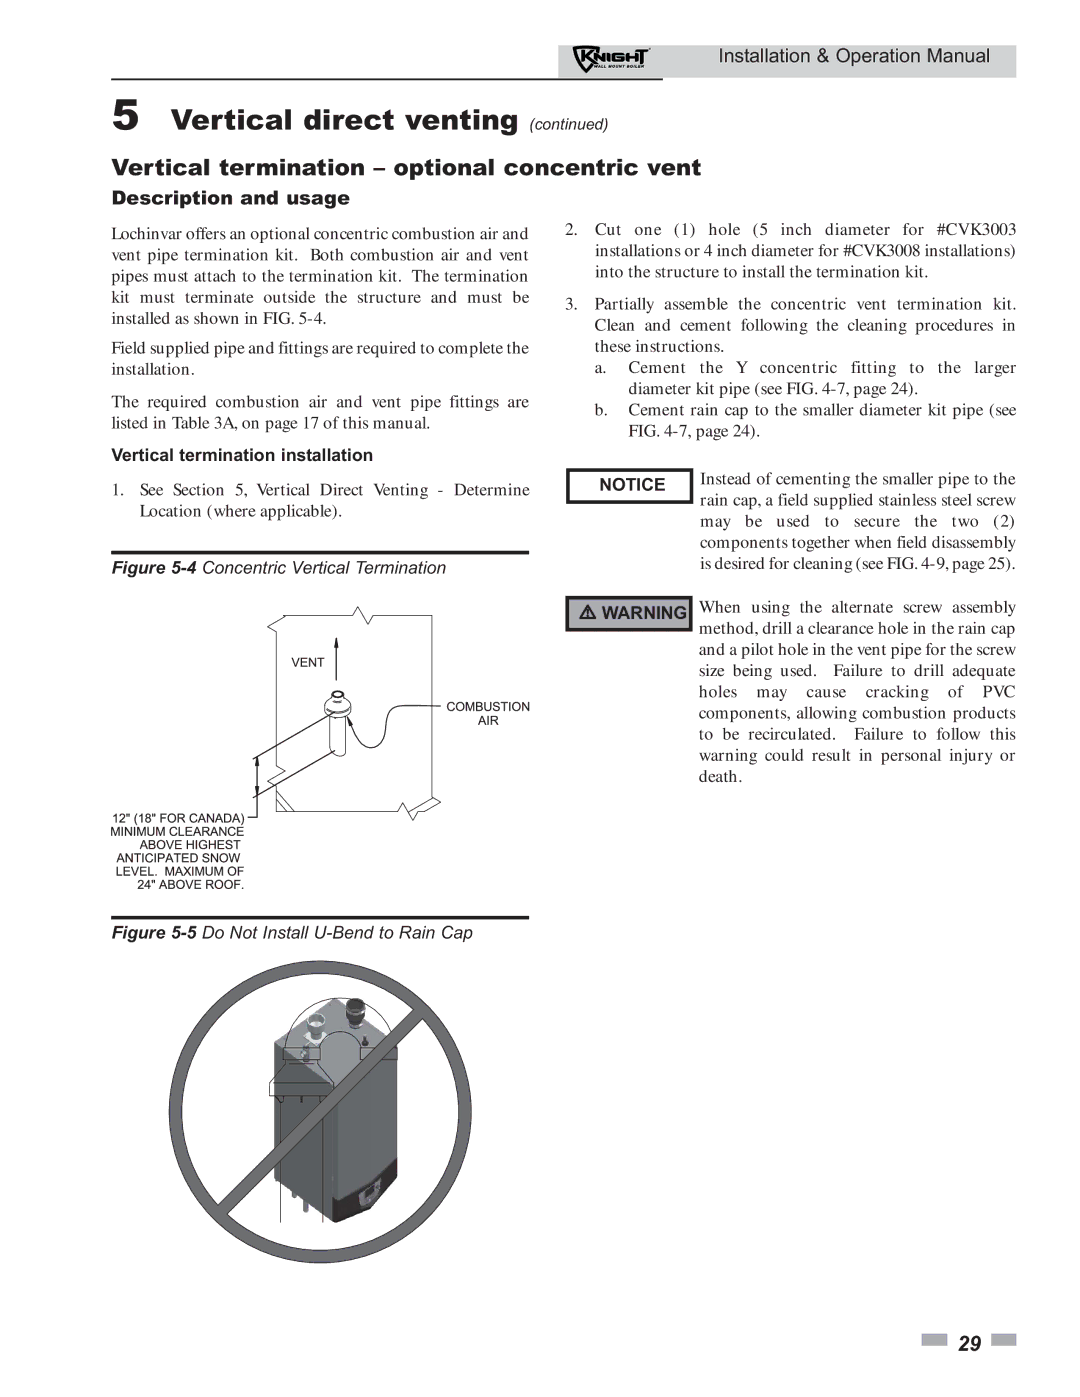 Lochinvar 51 operation manual Vertical termination optional concentric vent, Vertical termination installation 